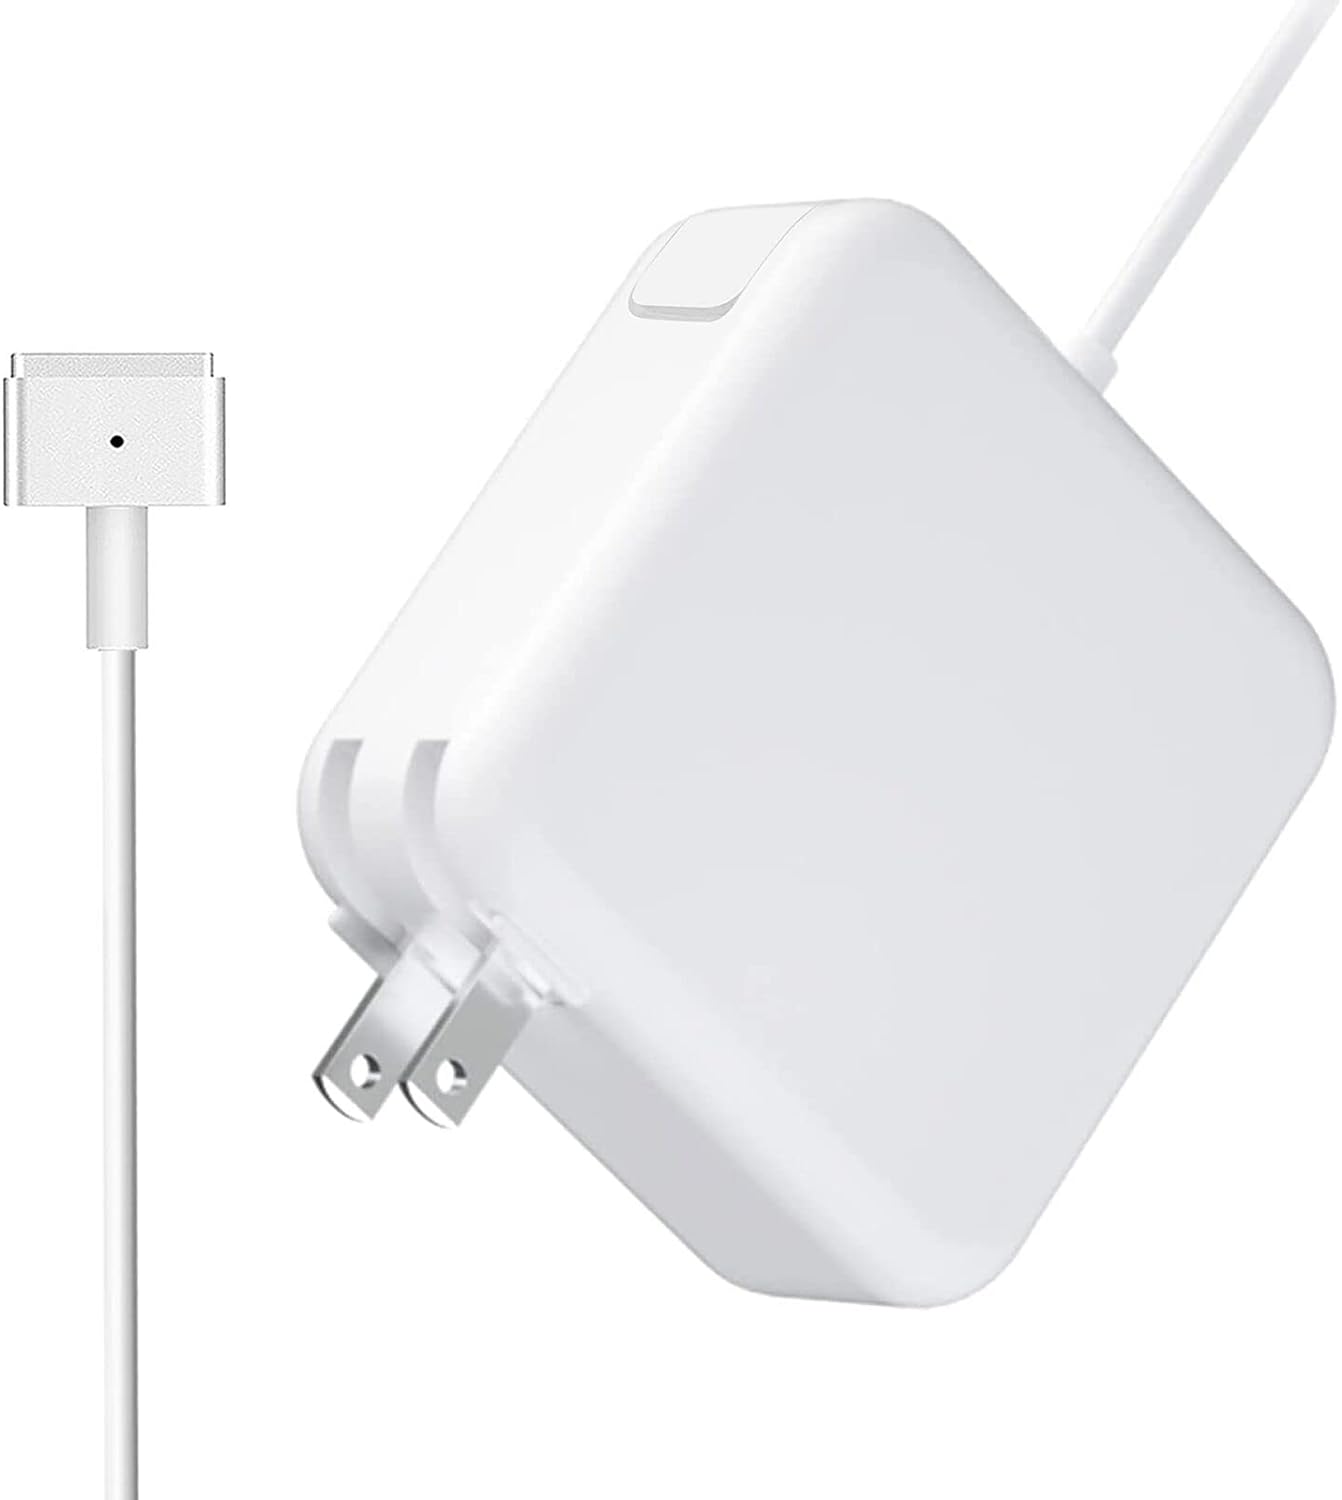 Mac Book Pro Charger, 60W Power Adapter T-Type Magnetic Connector Charger Compatible with Mac Book Pro Retina 13 Inch and Mac Book Air (Later 2012)